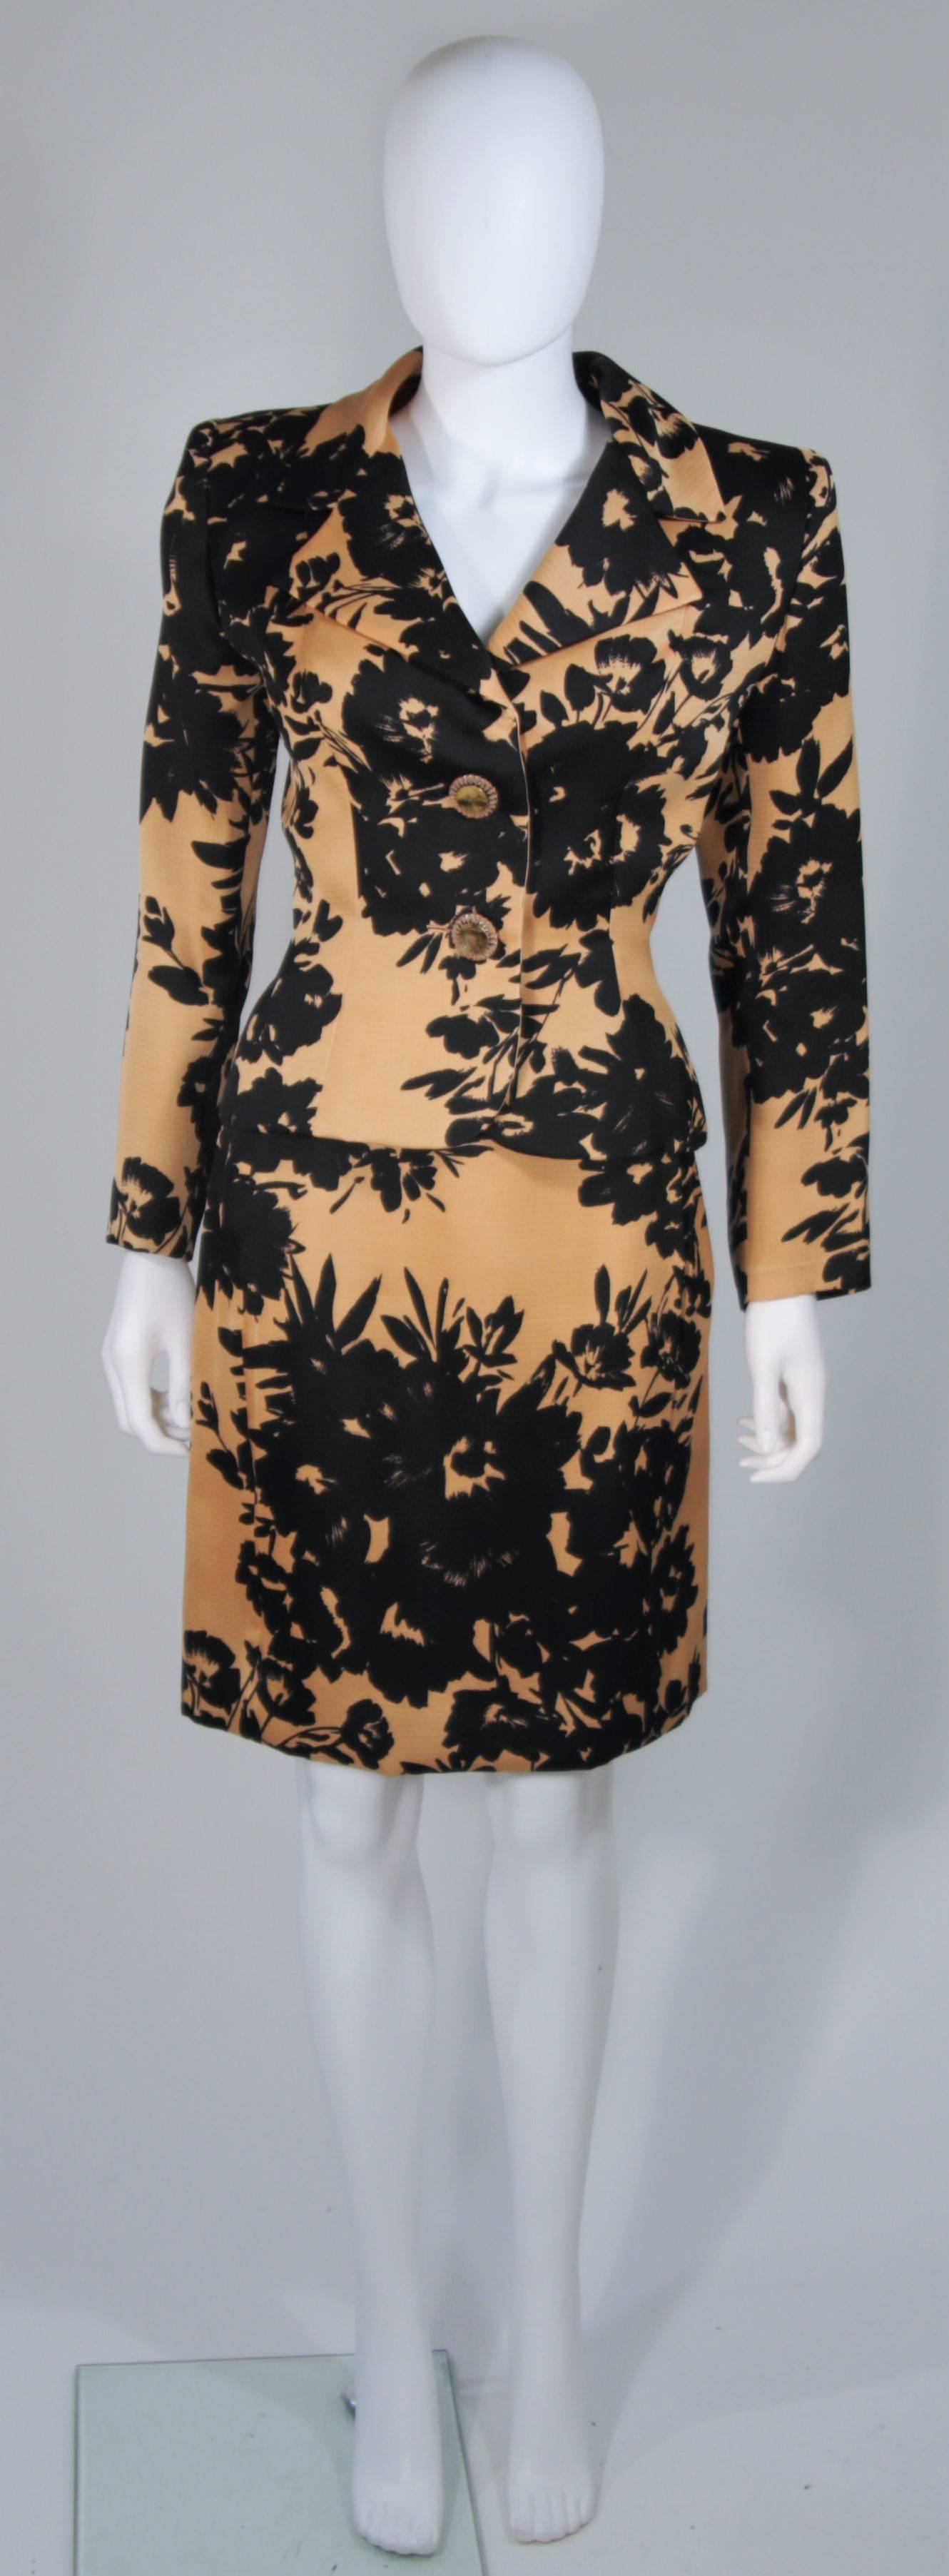  This Givenchy Couture skirt suit is composed of a apricot brown and black floral print fabric. with silk lining. The jacket has large rhinestone button closures. The pencil style skirt has a zipper closure. In excellent vintage condition.